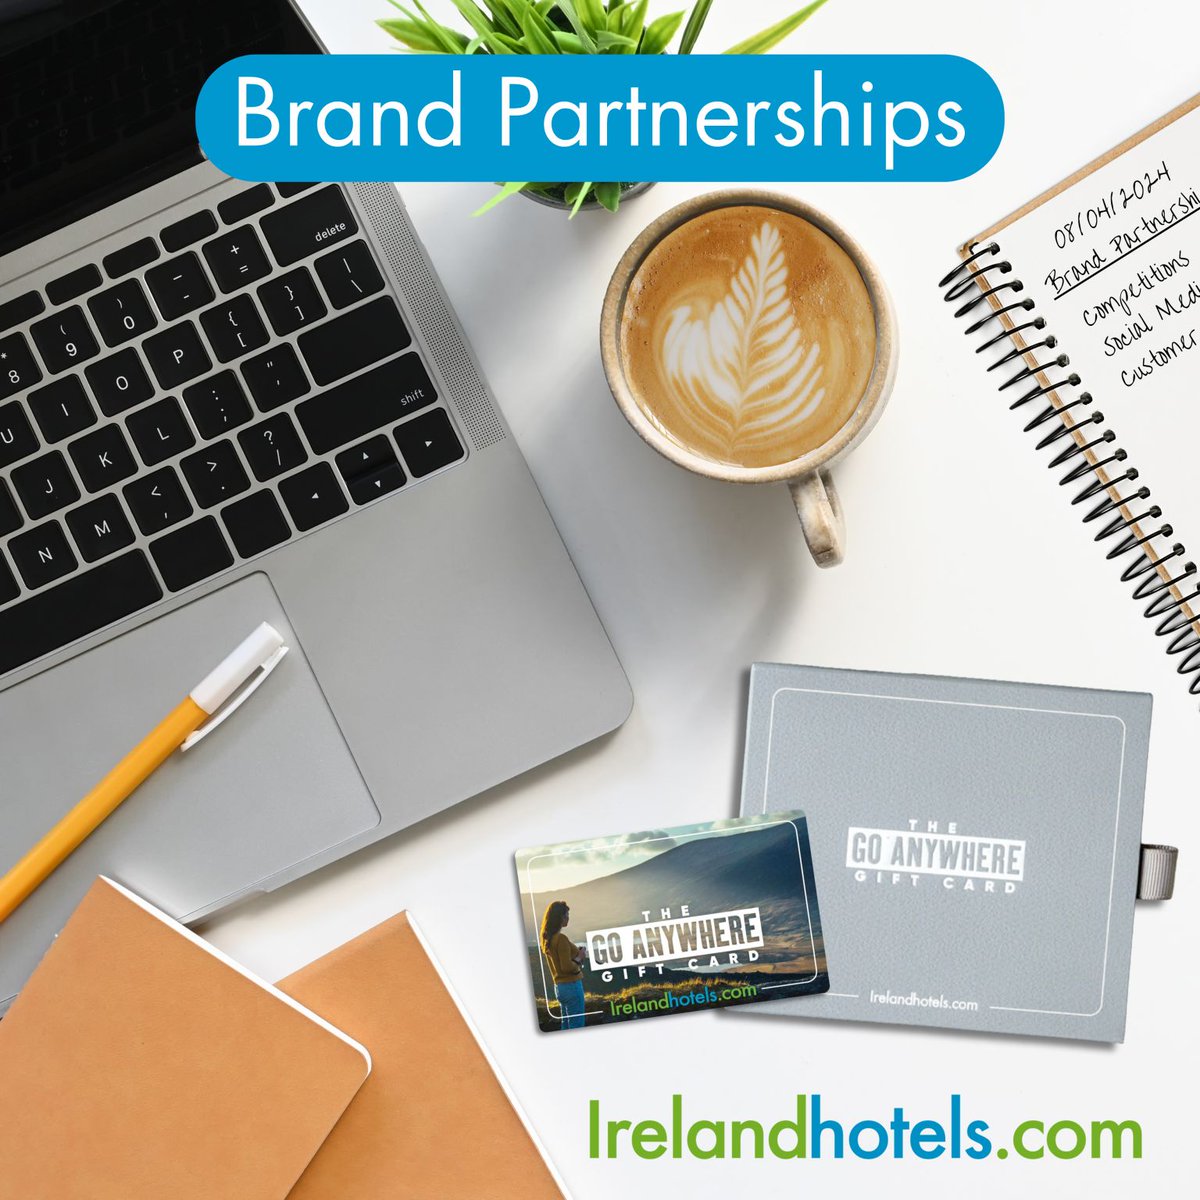 Looking for brand partnership ideas?💡

Reach more people and grow your audience with the Irelandhotels.com Go Anywhere Gift Card.

Follow us on LinkedIn to learn more about brand partnership opportunities 📲

#BrandPartnerships #Competitions #CustomerIncentivising